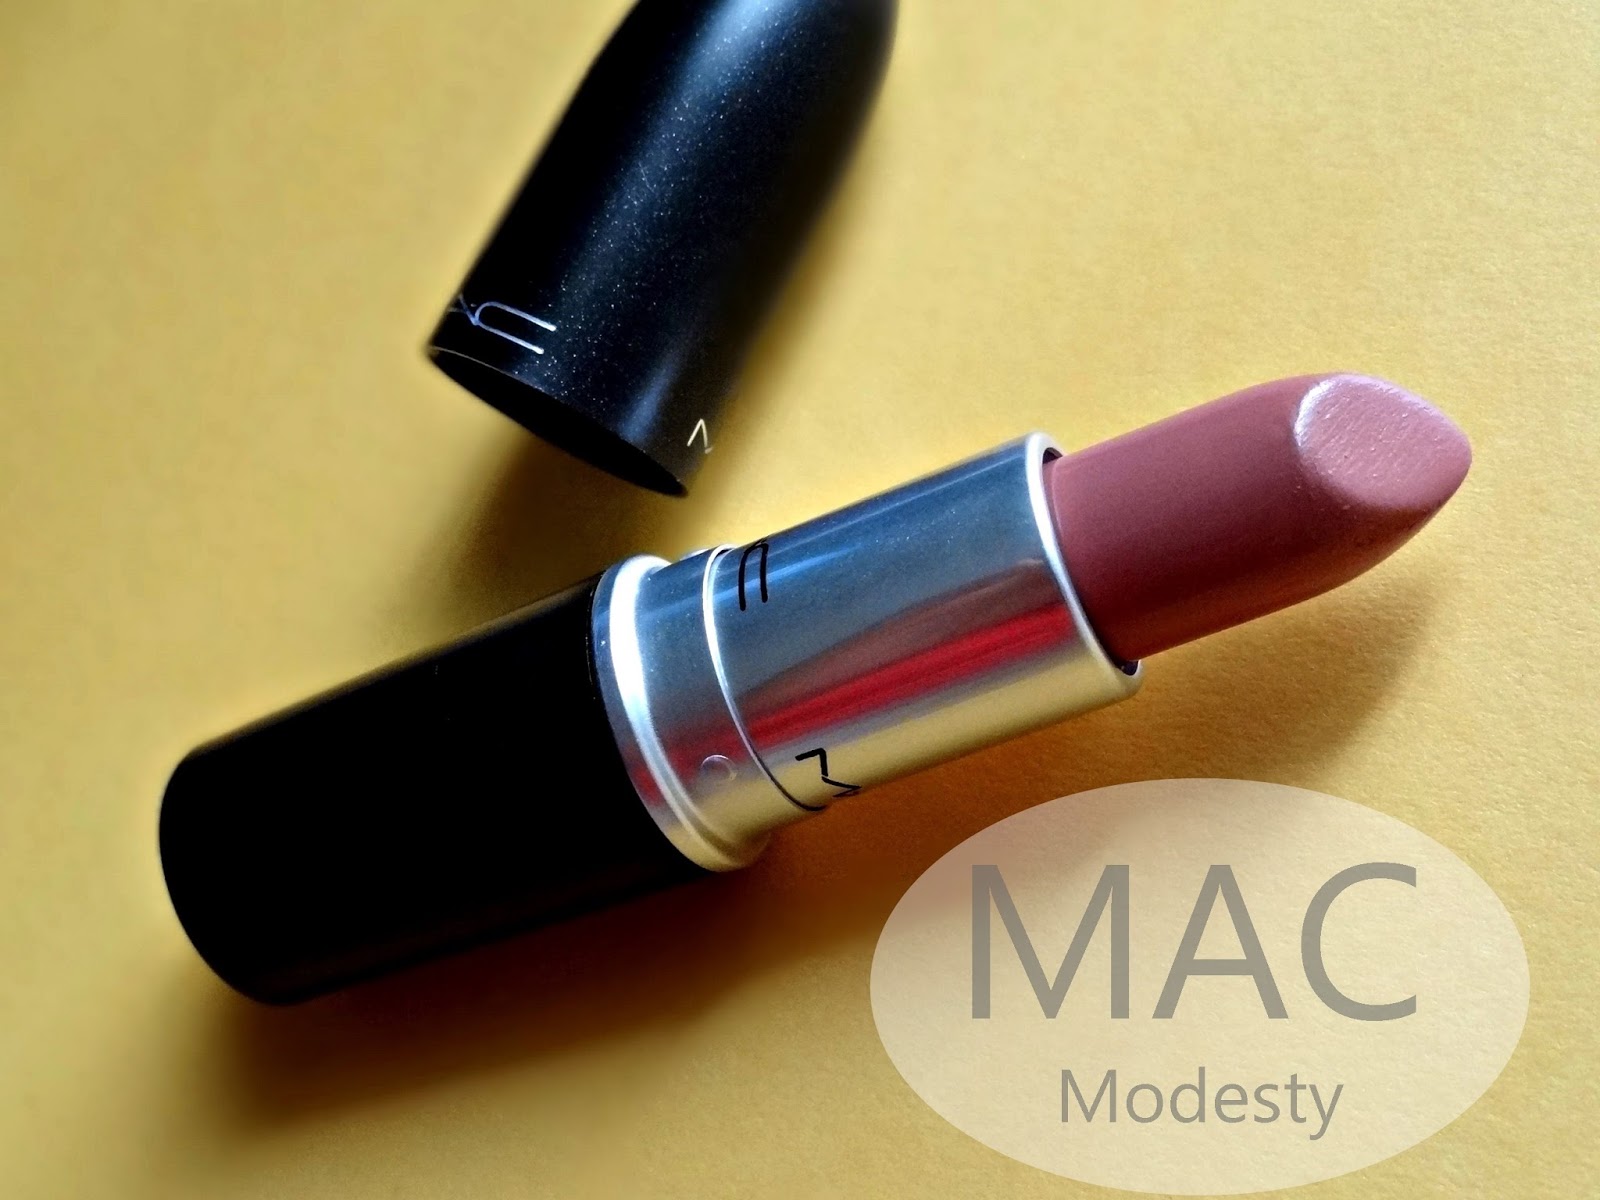 MAC Cremesheen Lipstick in Modesty Review, Photos & Swatches